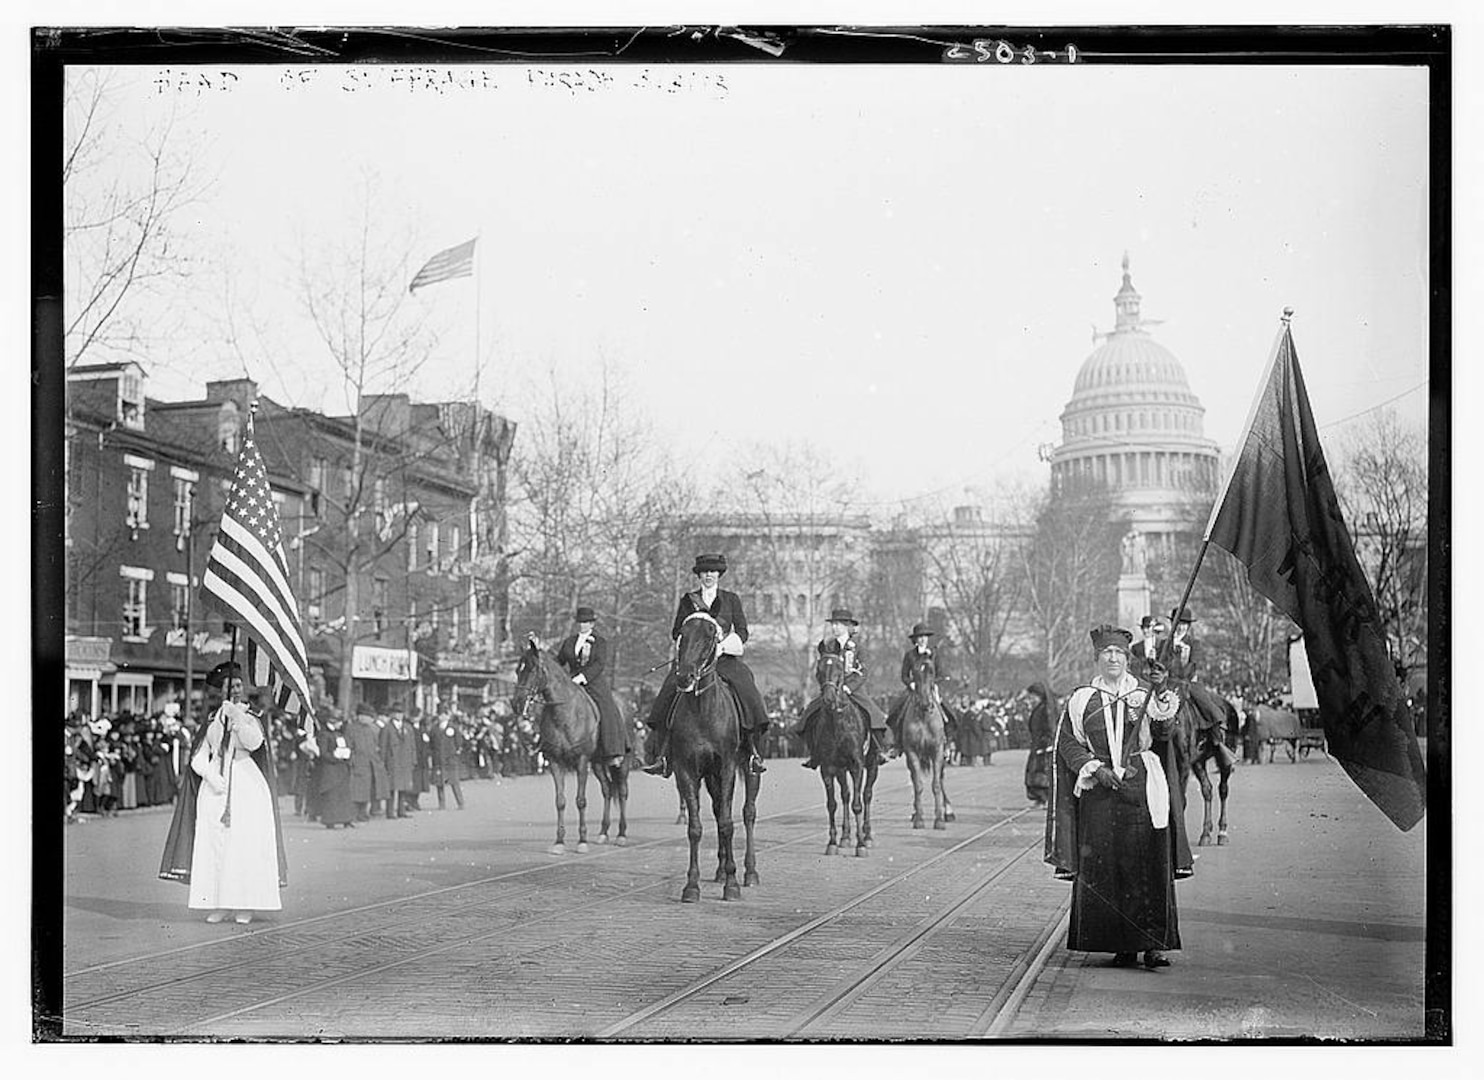 Congressional Union for Women's Suffrage supporters marched on Pennsylvania Avenue the day before President Woodrow Wilson's inauguration.